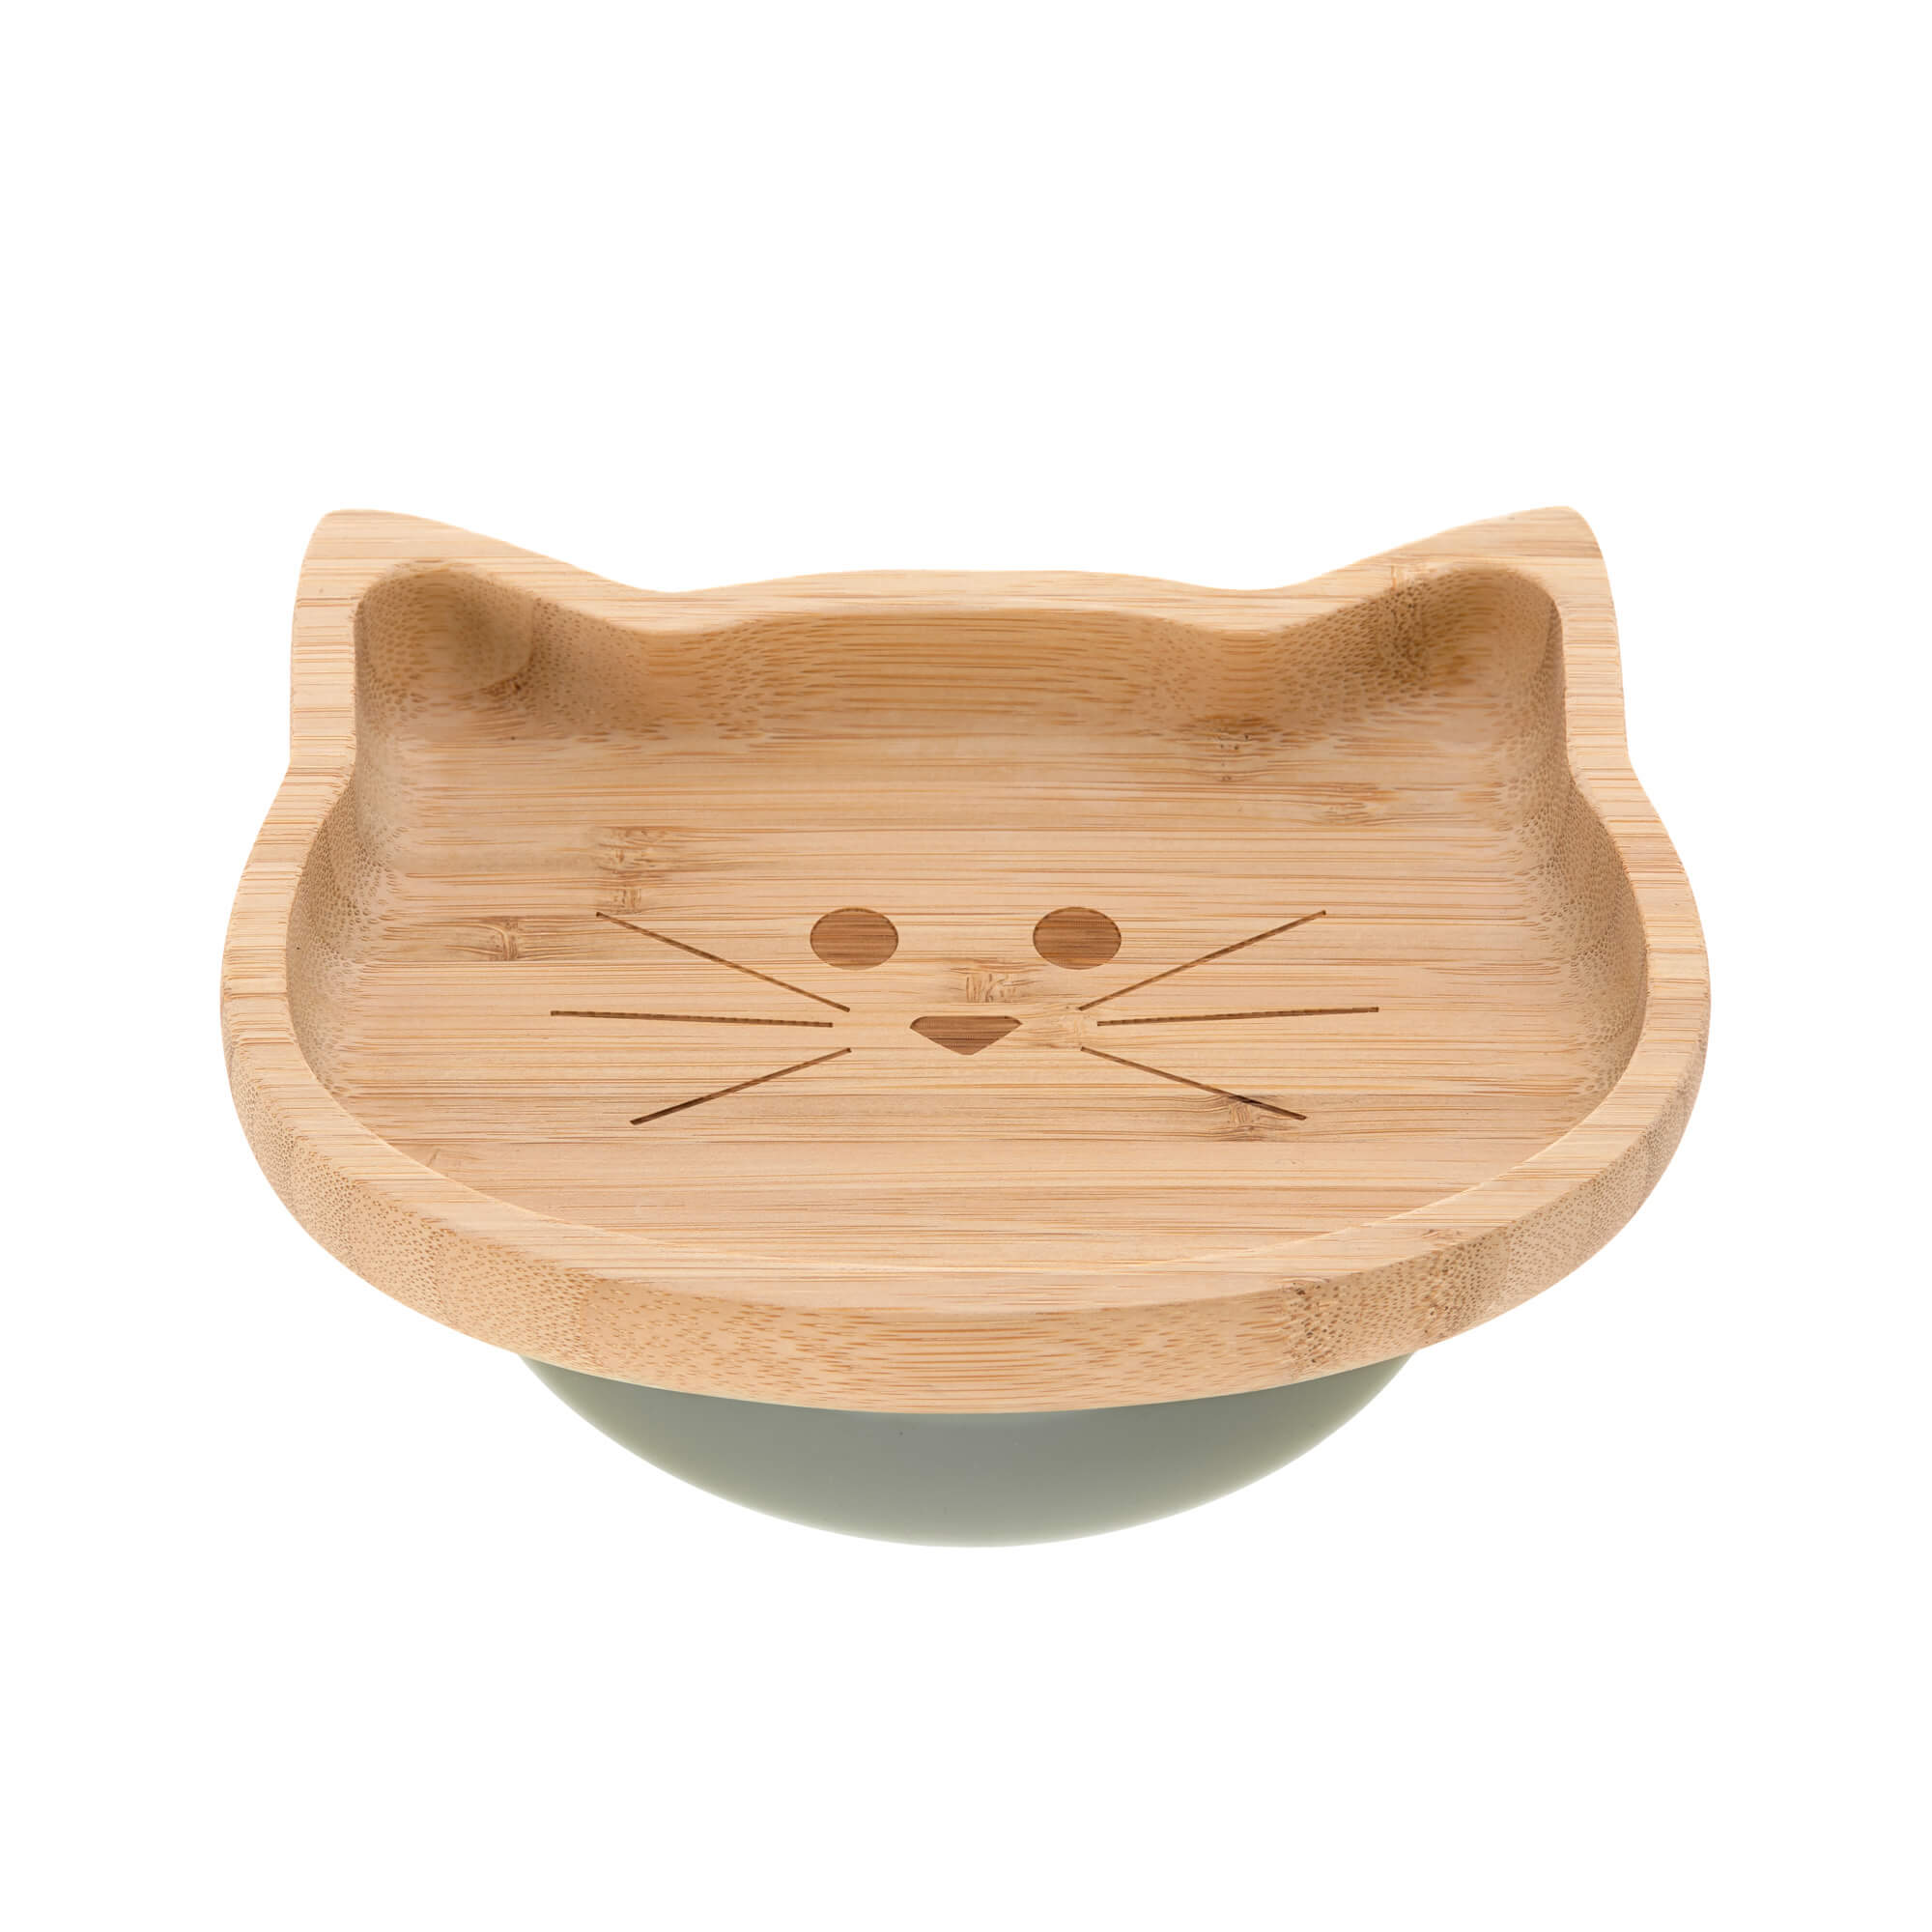 Children's plate bamboo wood with suction cup